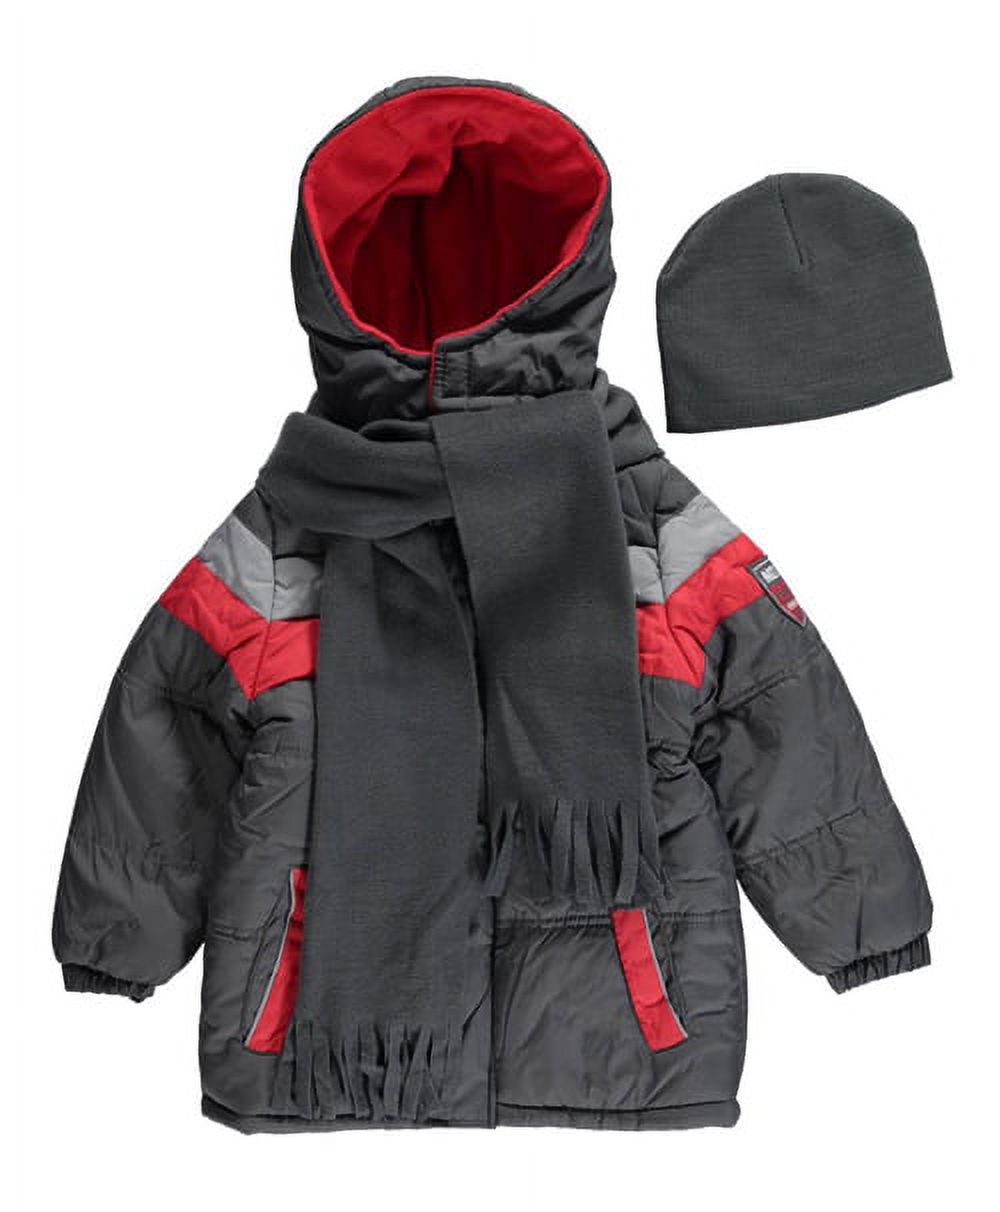 iXtreme Little Boys' "Howl Harp" Insulated Jacket with Beanie (Sizes 4 - 7) - charcoal gray, 4 - image 2 of 2